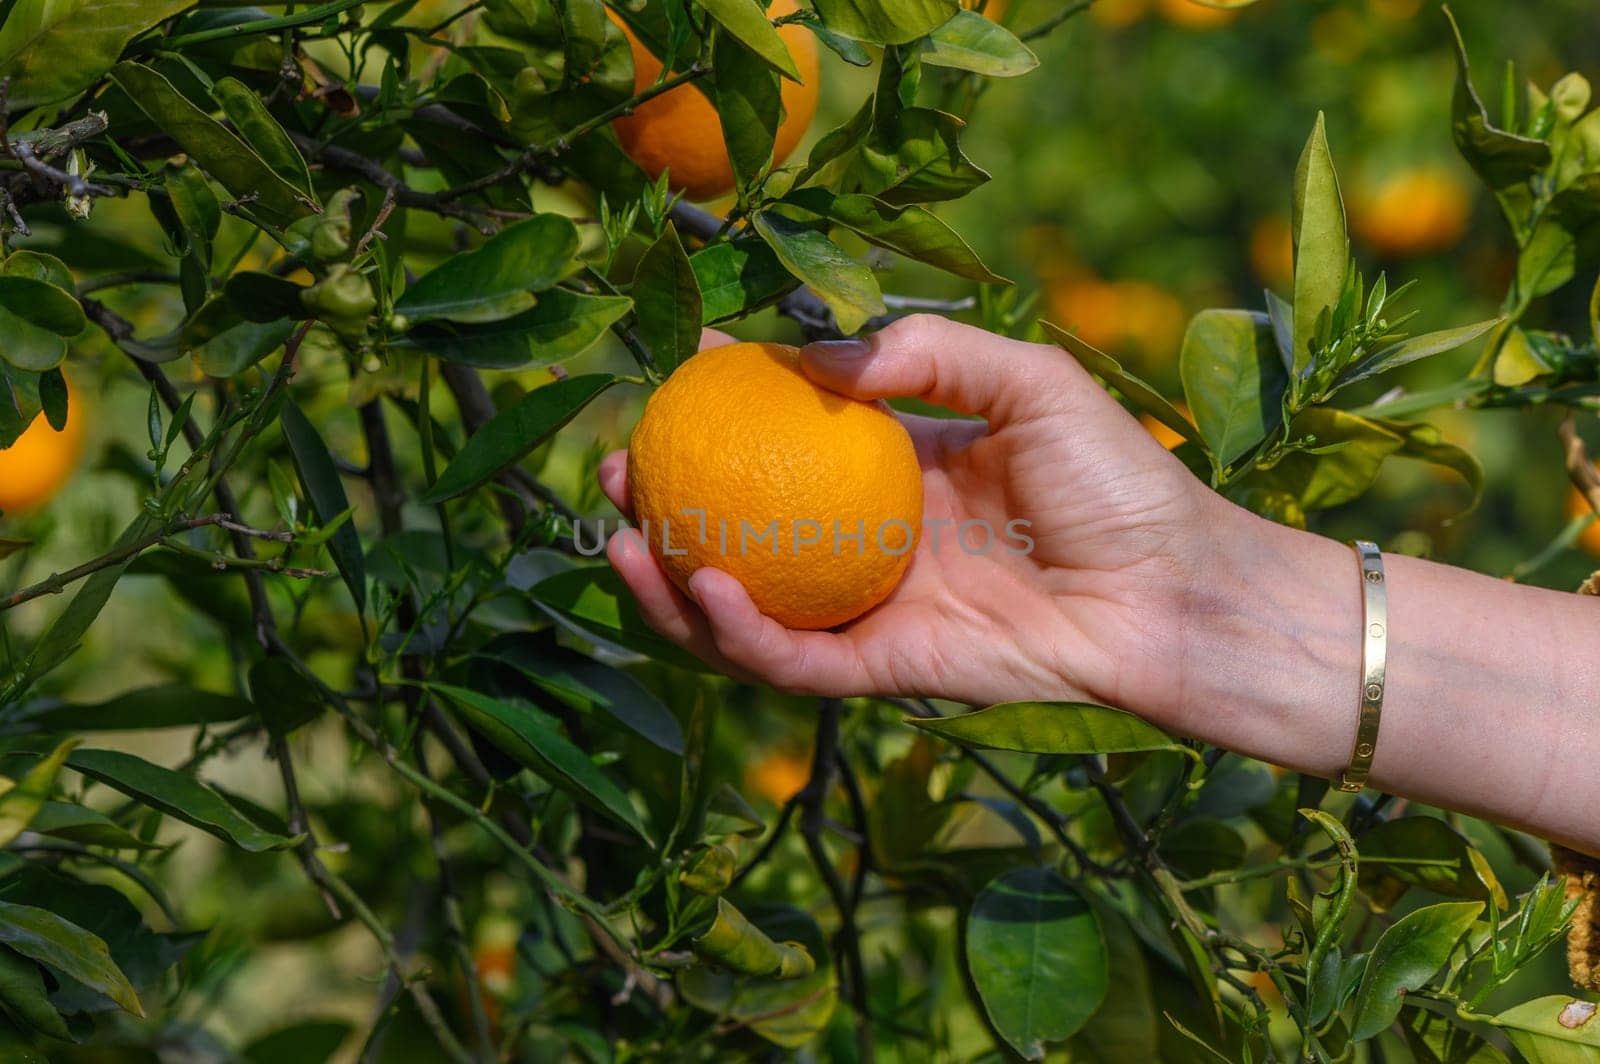 Women's hands pick juicy tasty oranges from a tree in the garden, harvesting on a sunny day. 8